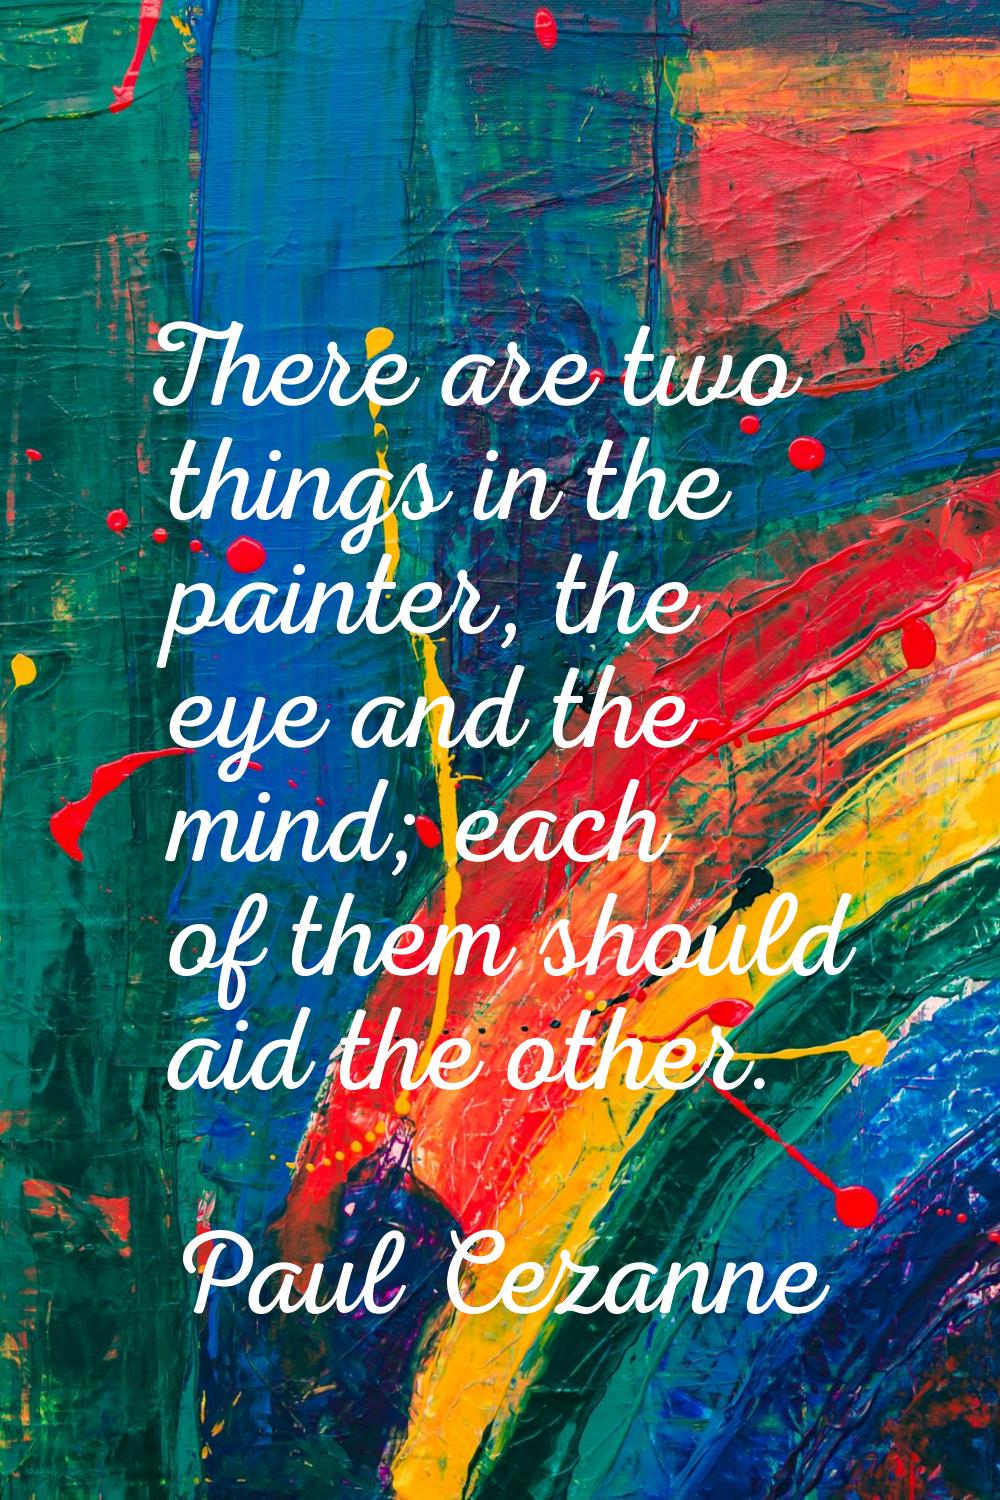 There are two things in the painter, the eye and the mind; each of them should aid the other.